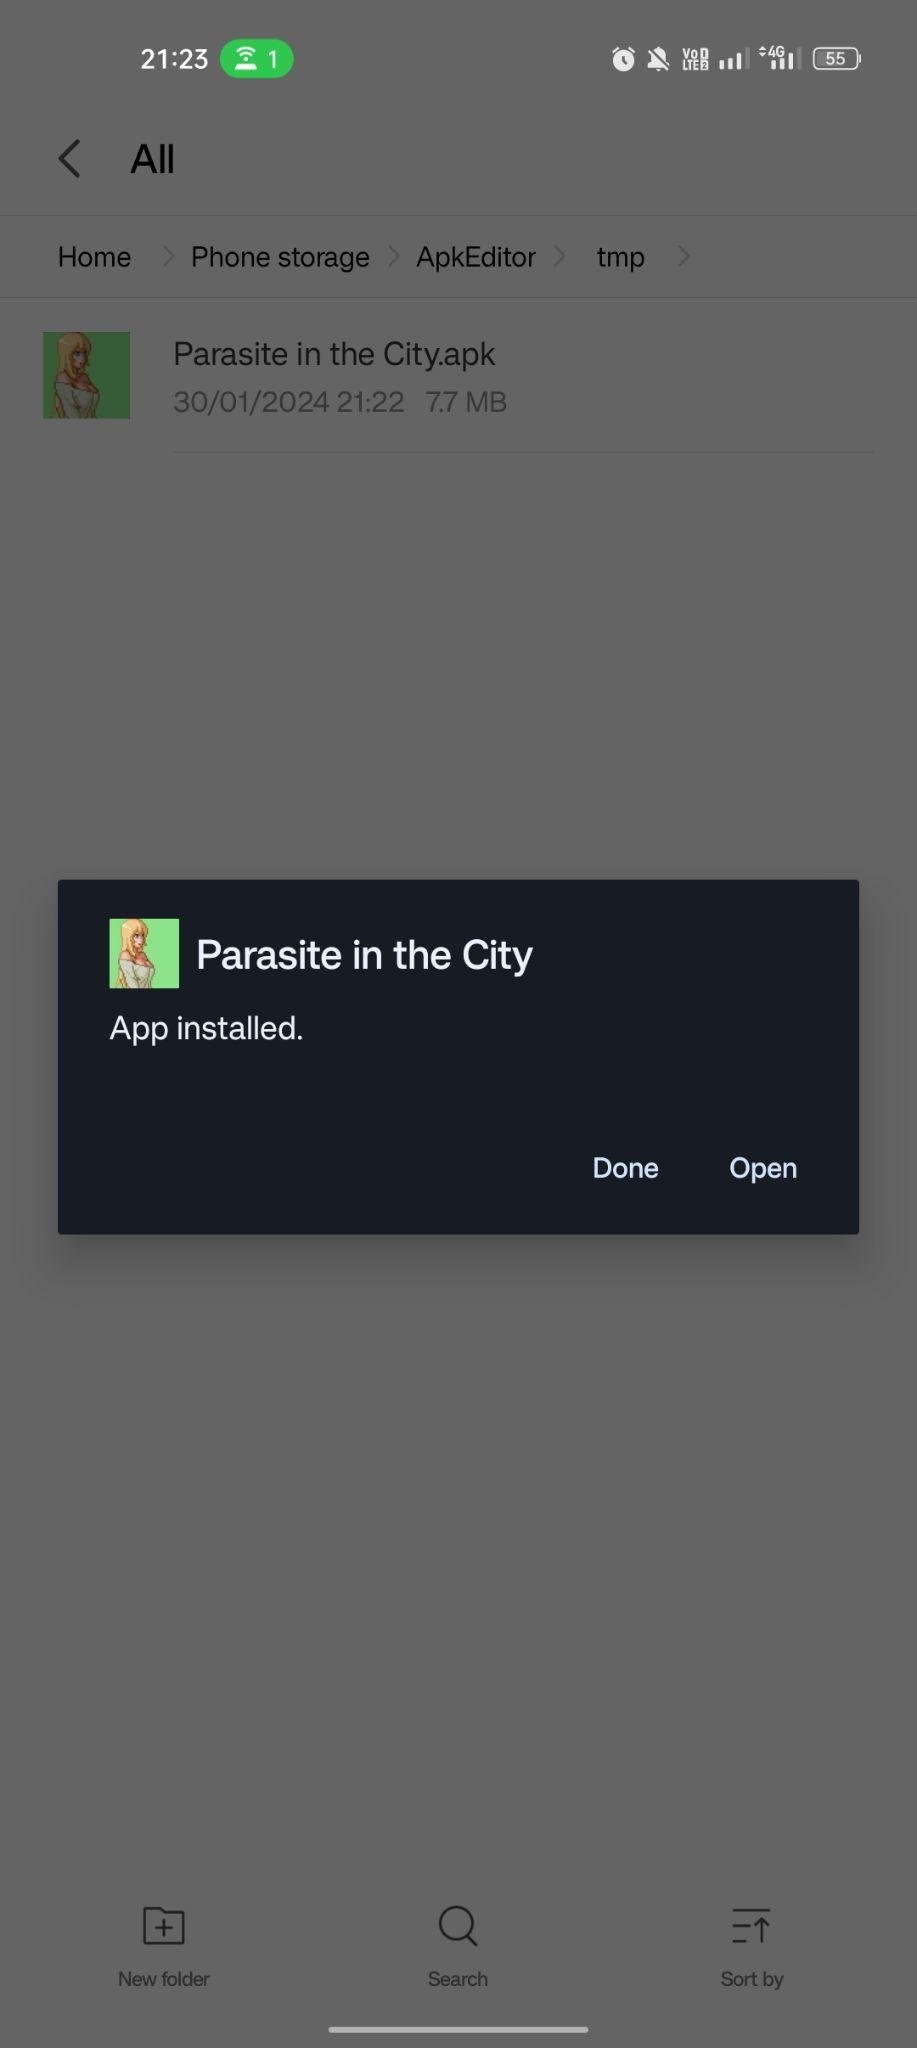 The Parasite in The City apk installed